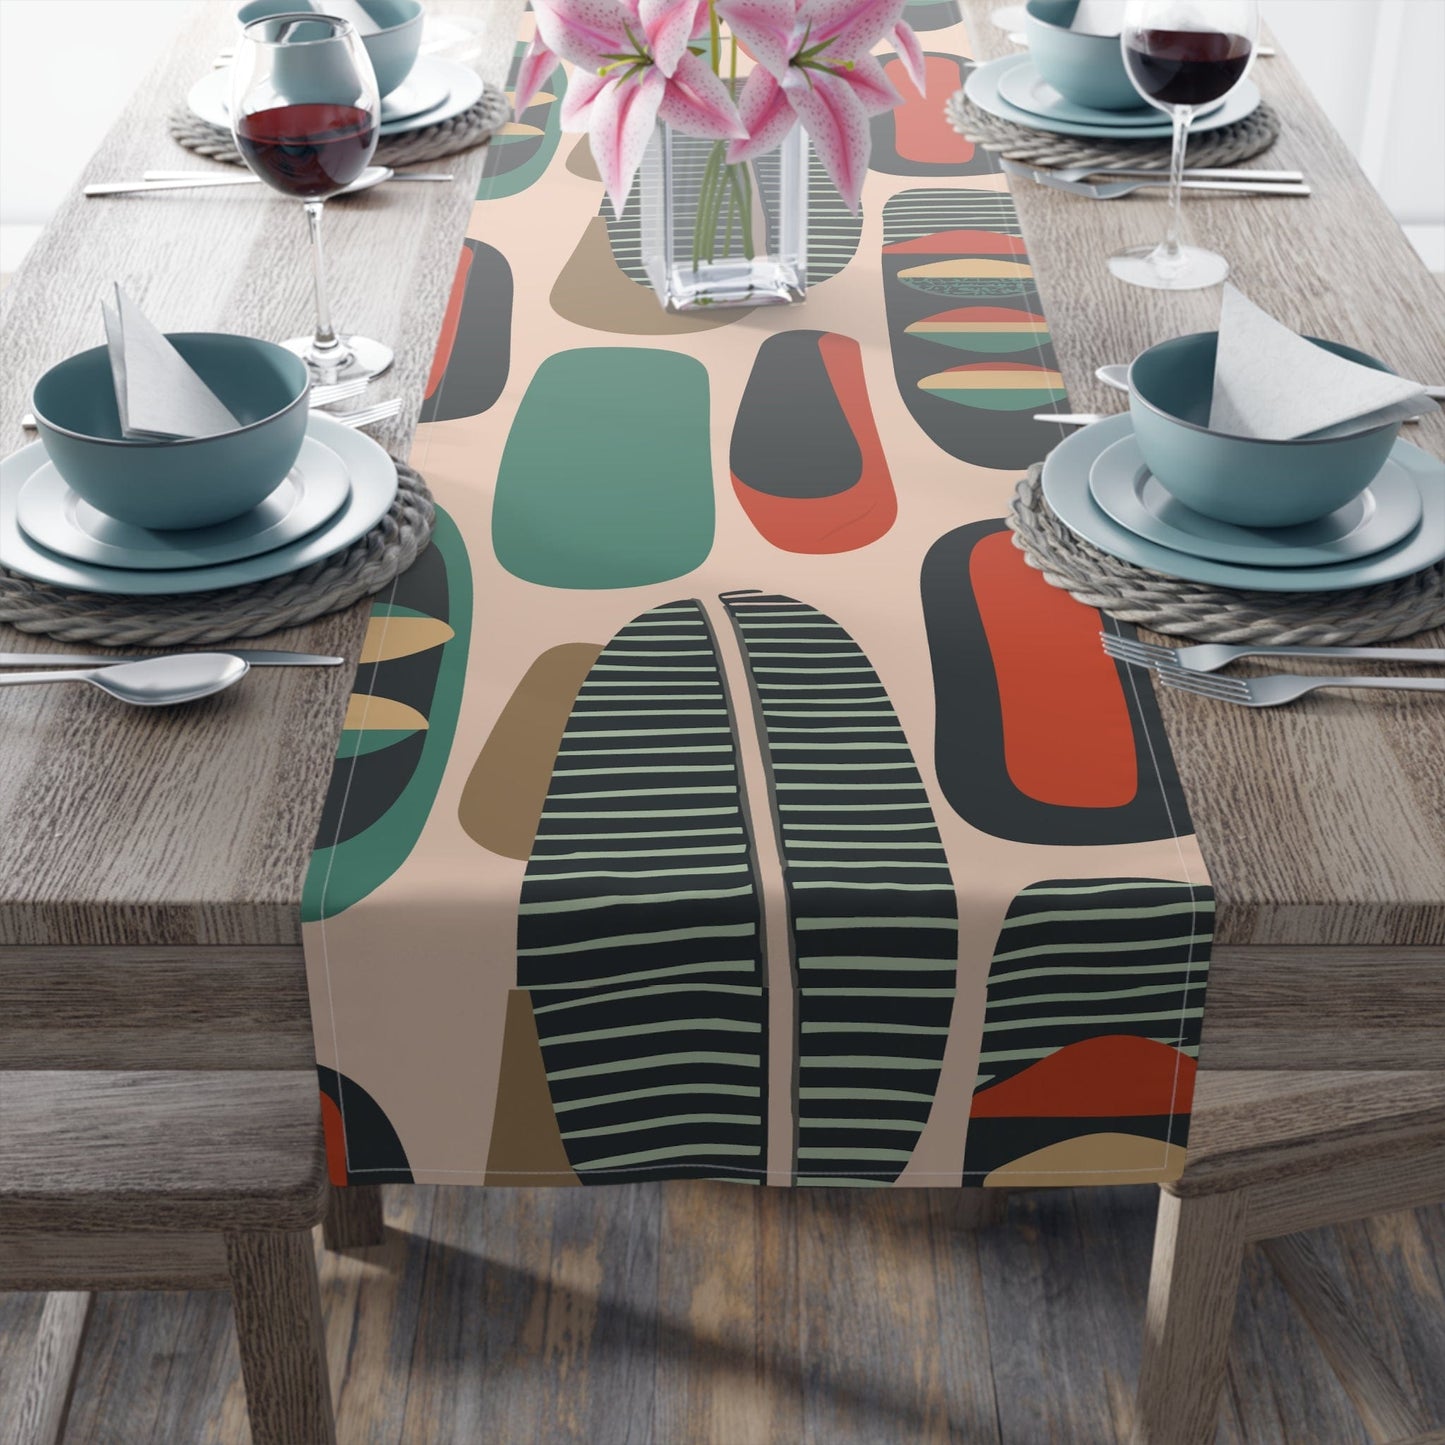 Kate McEnroe New York Retro Mod Table Runner, MCM Geometric Dining Decor, Abstract Shapes Table Linen, Mid Century Modern Table Accessory Table Runners 16" × 72" / Cotton Twill 23247645897037943048